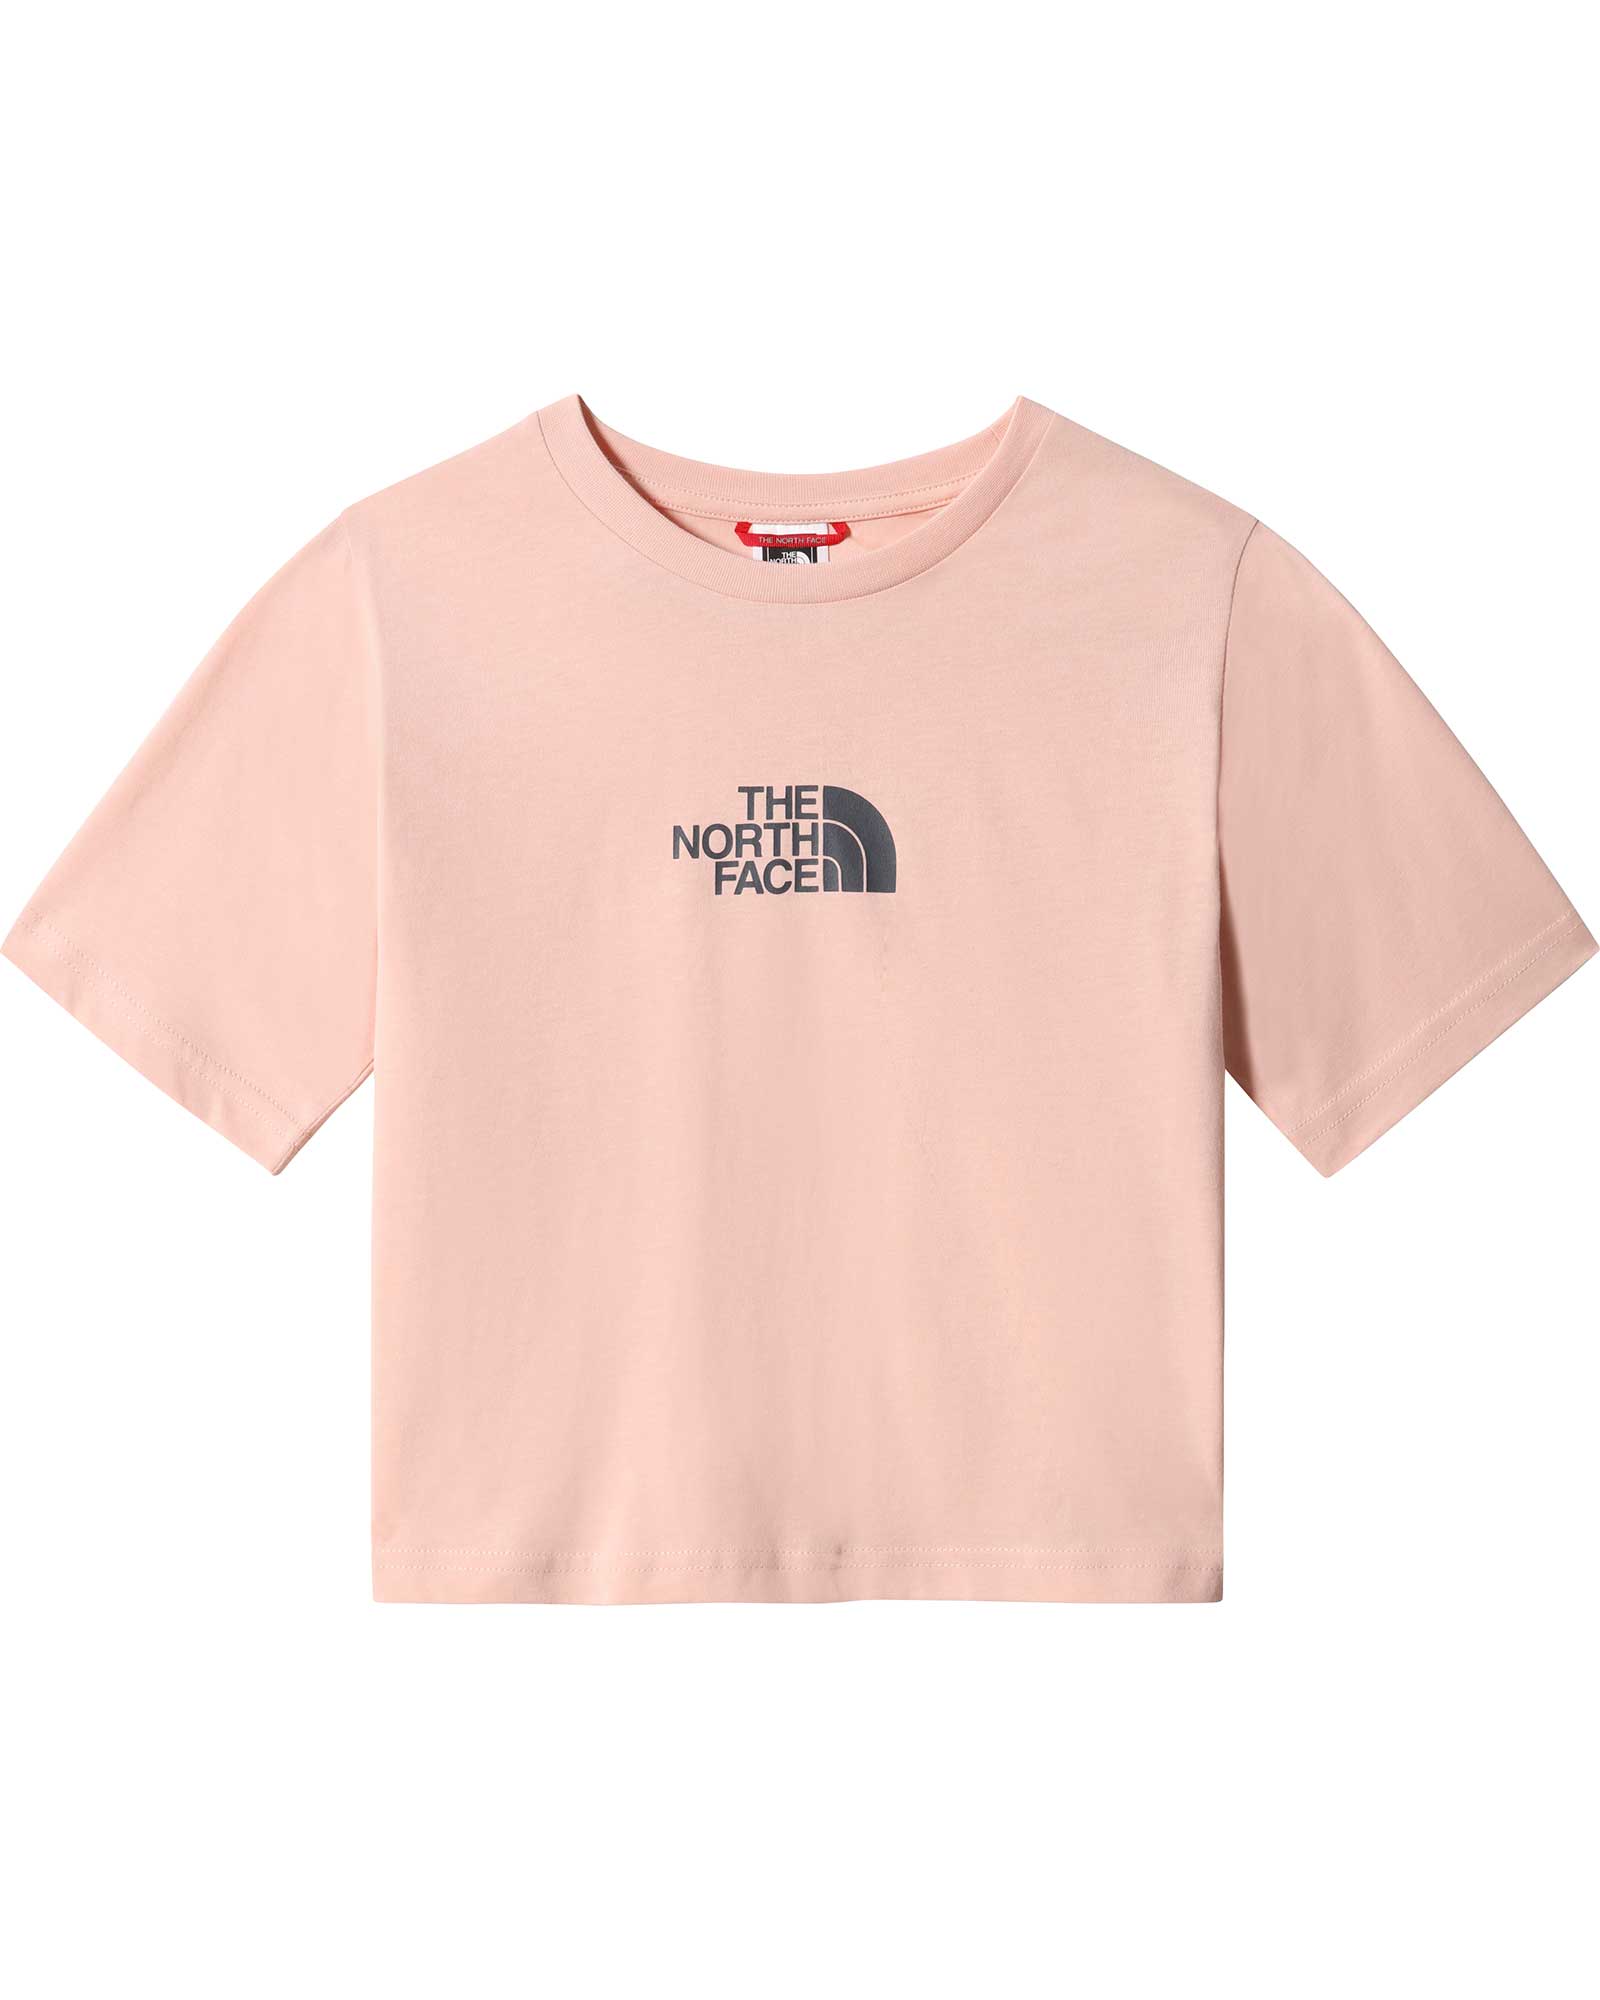 The North Face Cropped Graphic Girls’ T Shirt XL - Evening Sand Pink XL